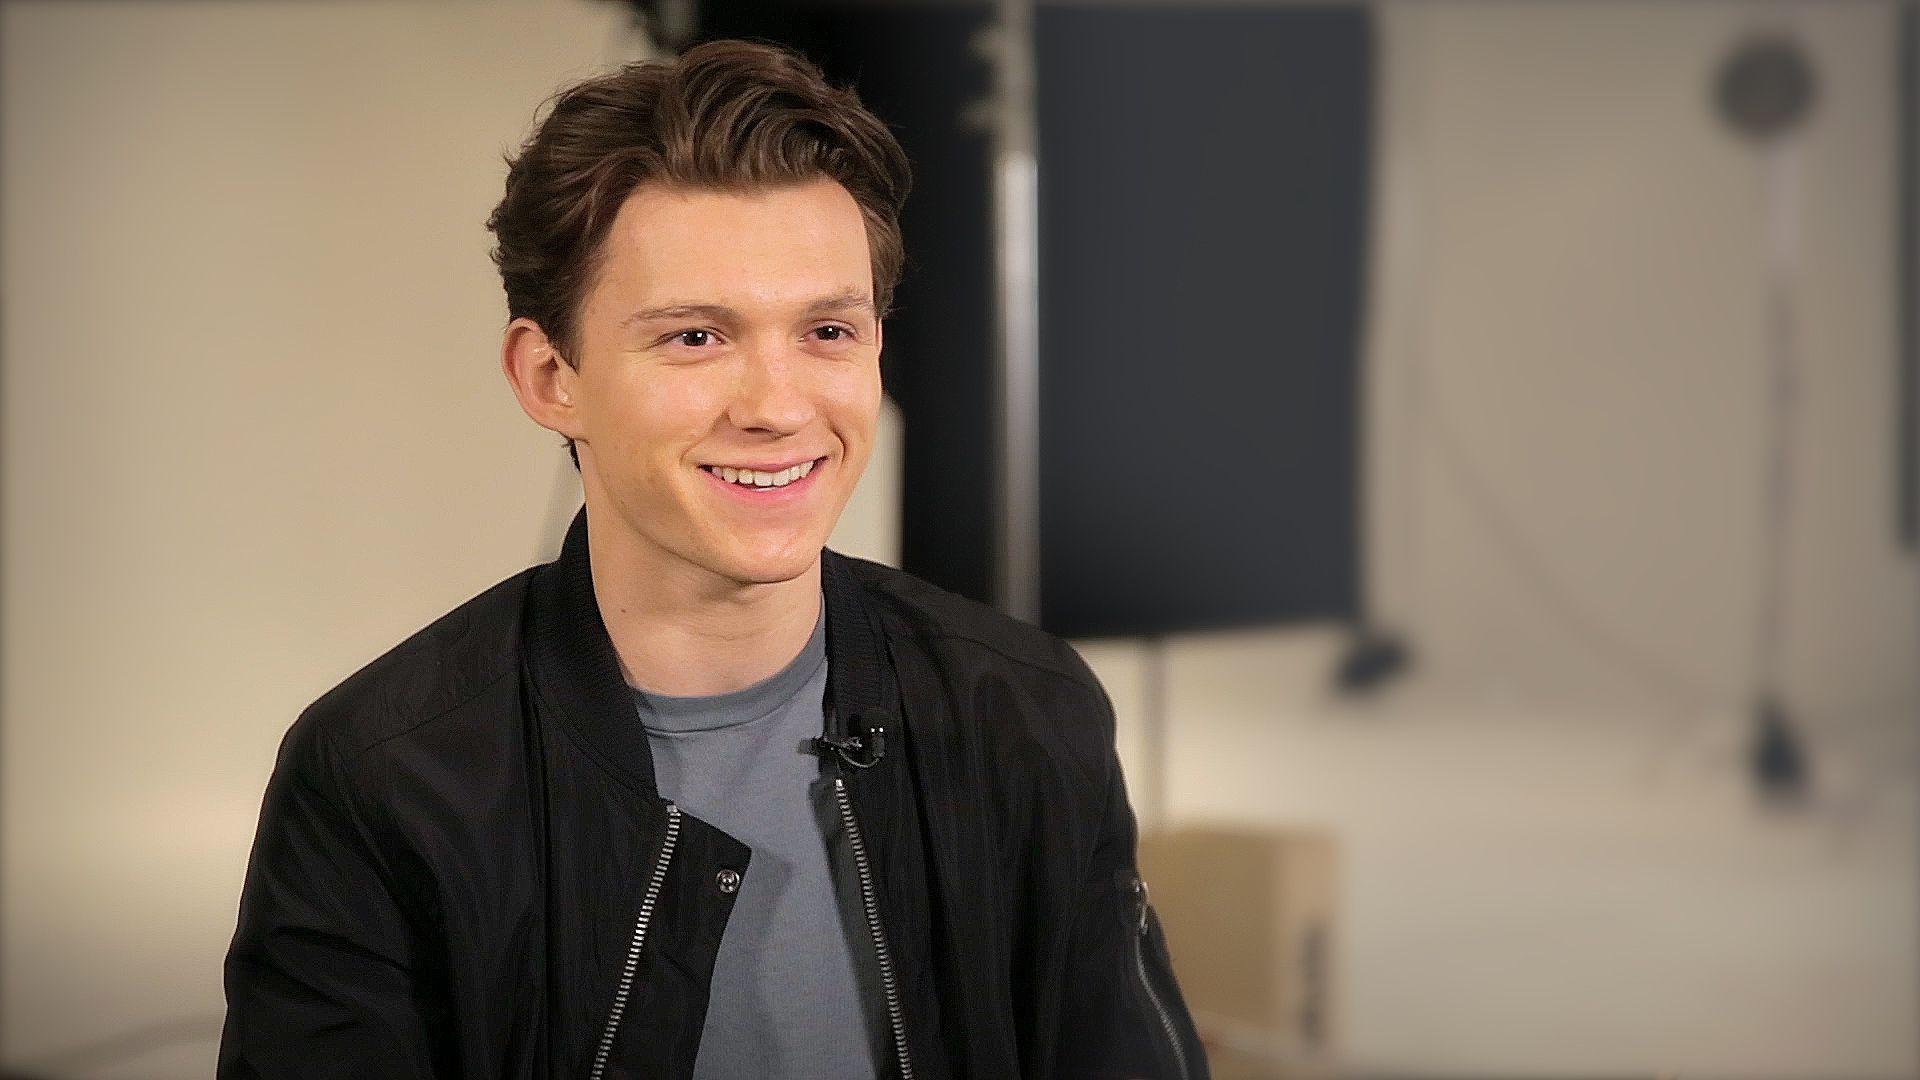 The New Spider Man Is Different. Tom Holland Promises